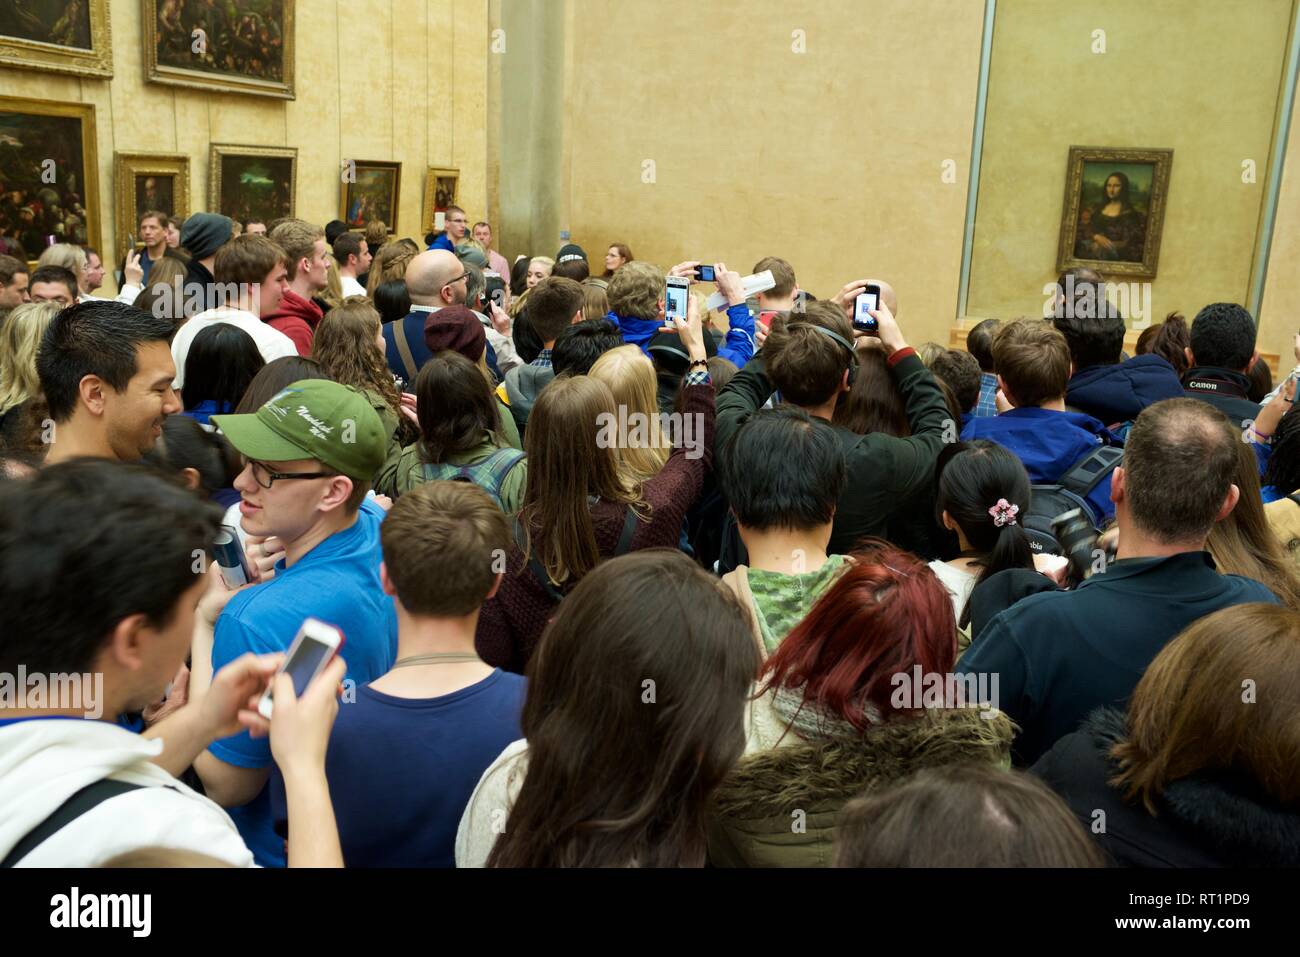 PARIS, FRANCE - APRIL 3, 2015: Tourists photographing the famous picture of Gioconda in Louvre Museum. Stock Photo